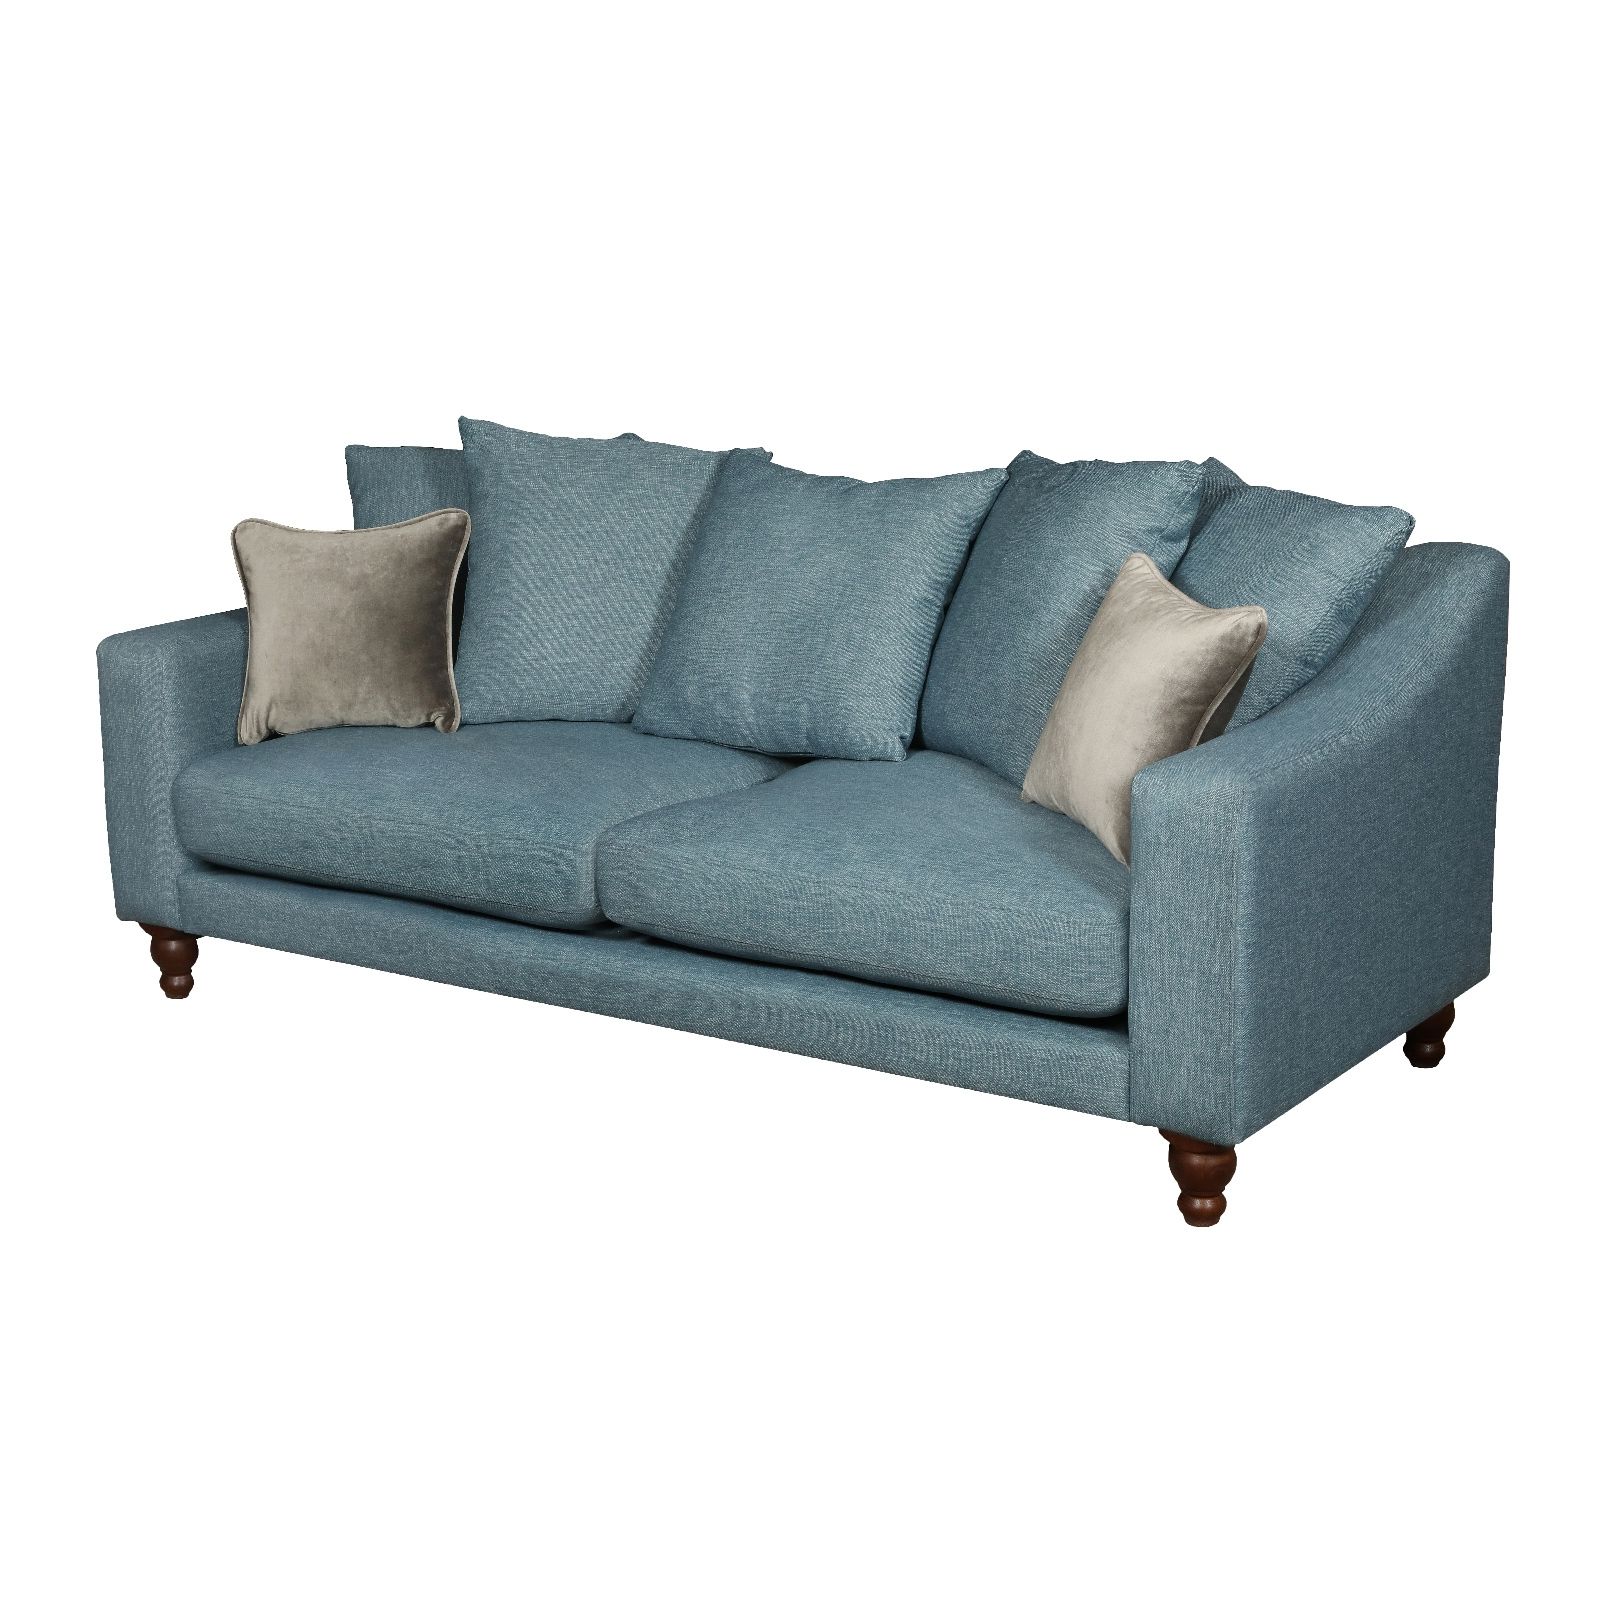 Sofas With Pillowback Wood Bases With Fashionable Vintage Penryn Pillowback 3 Seater Sofa – Vintage Kernow – Carlton (View 9 of 15)